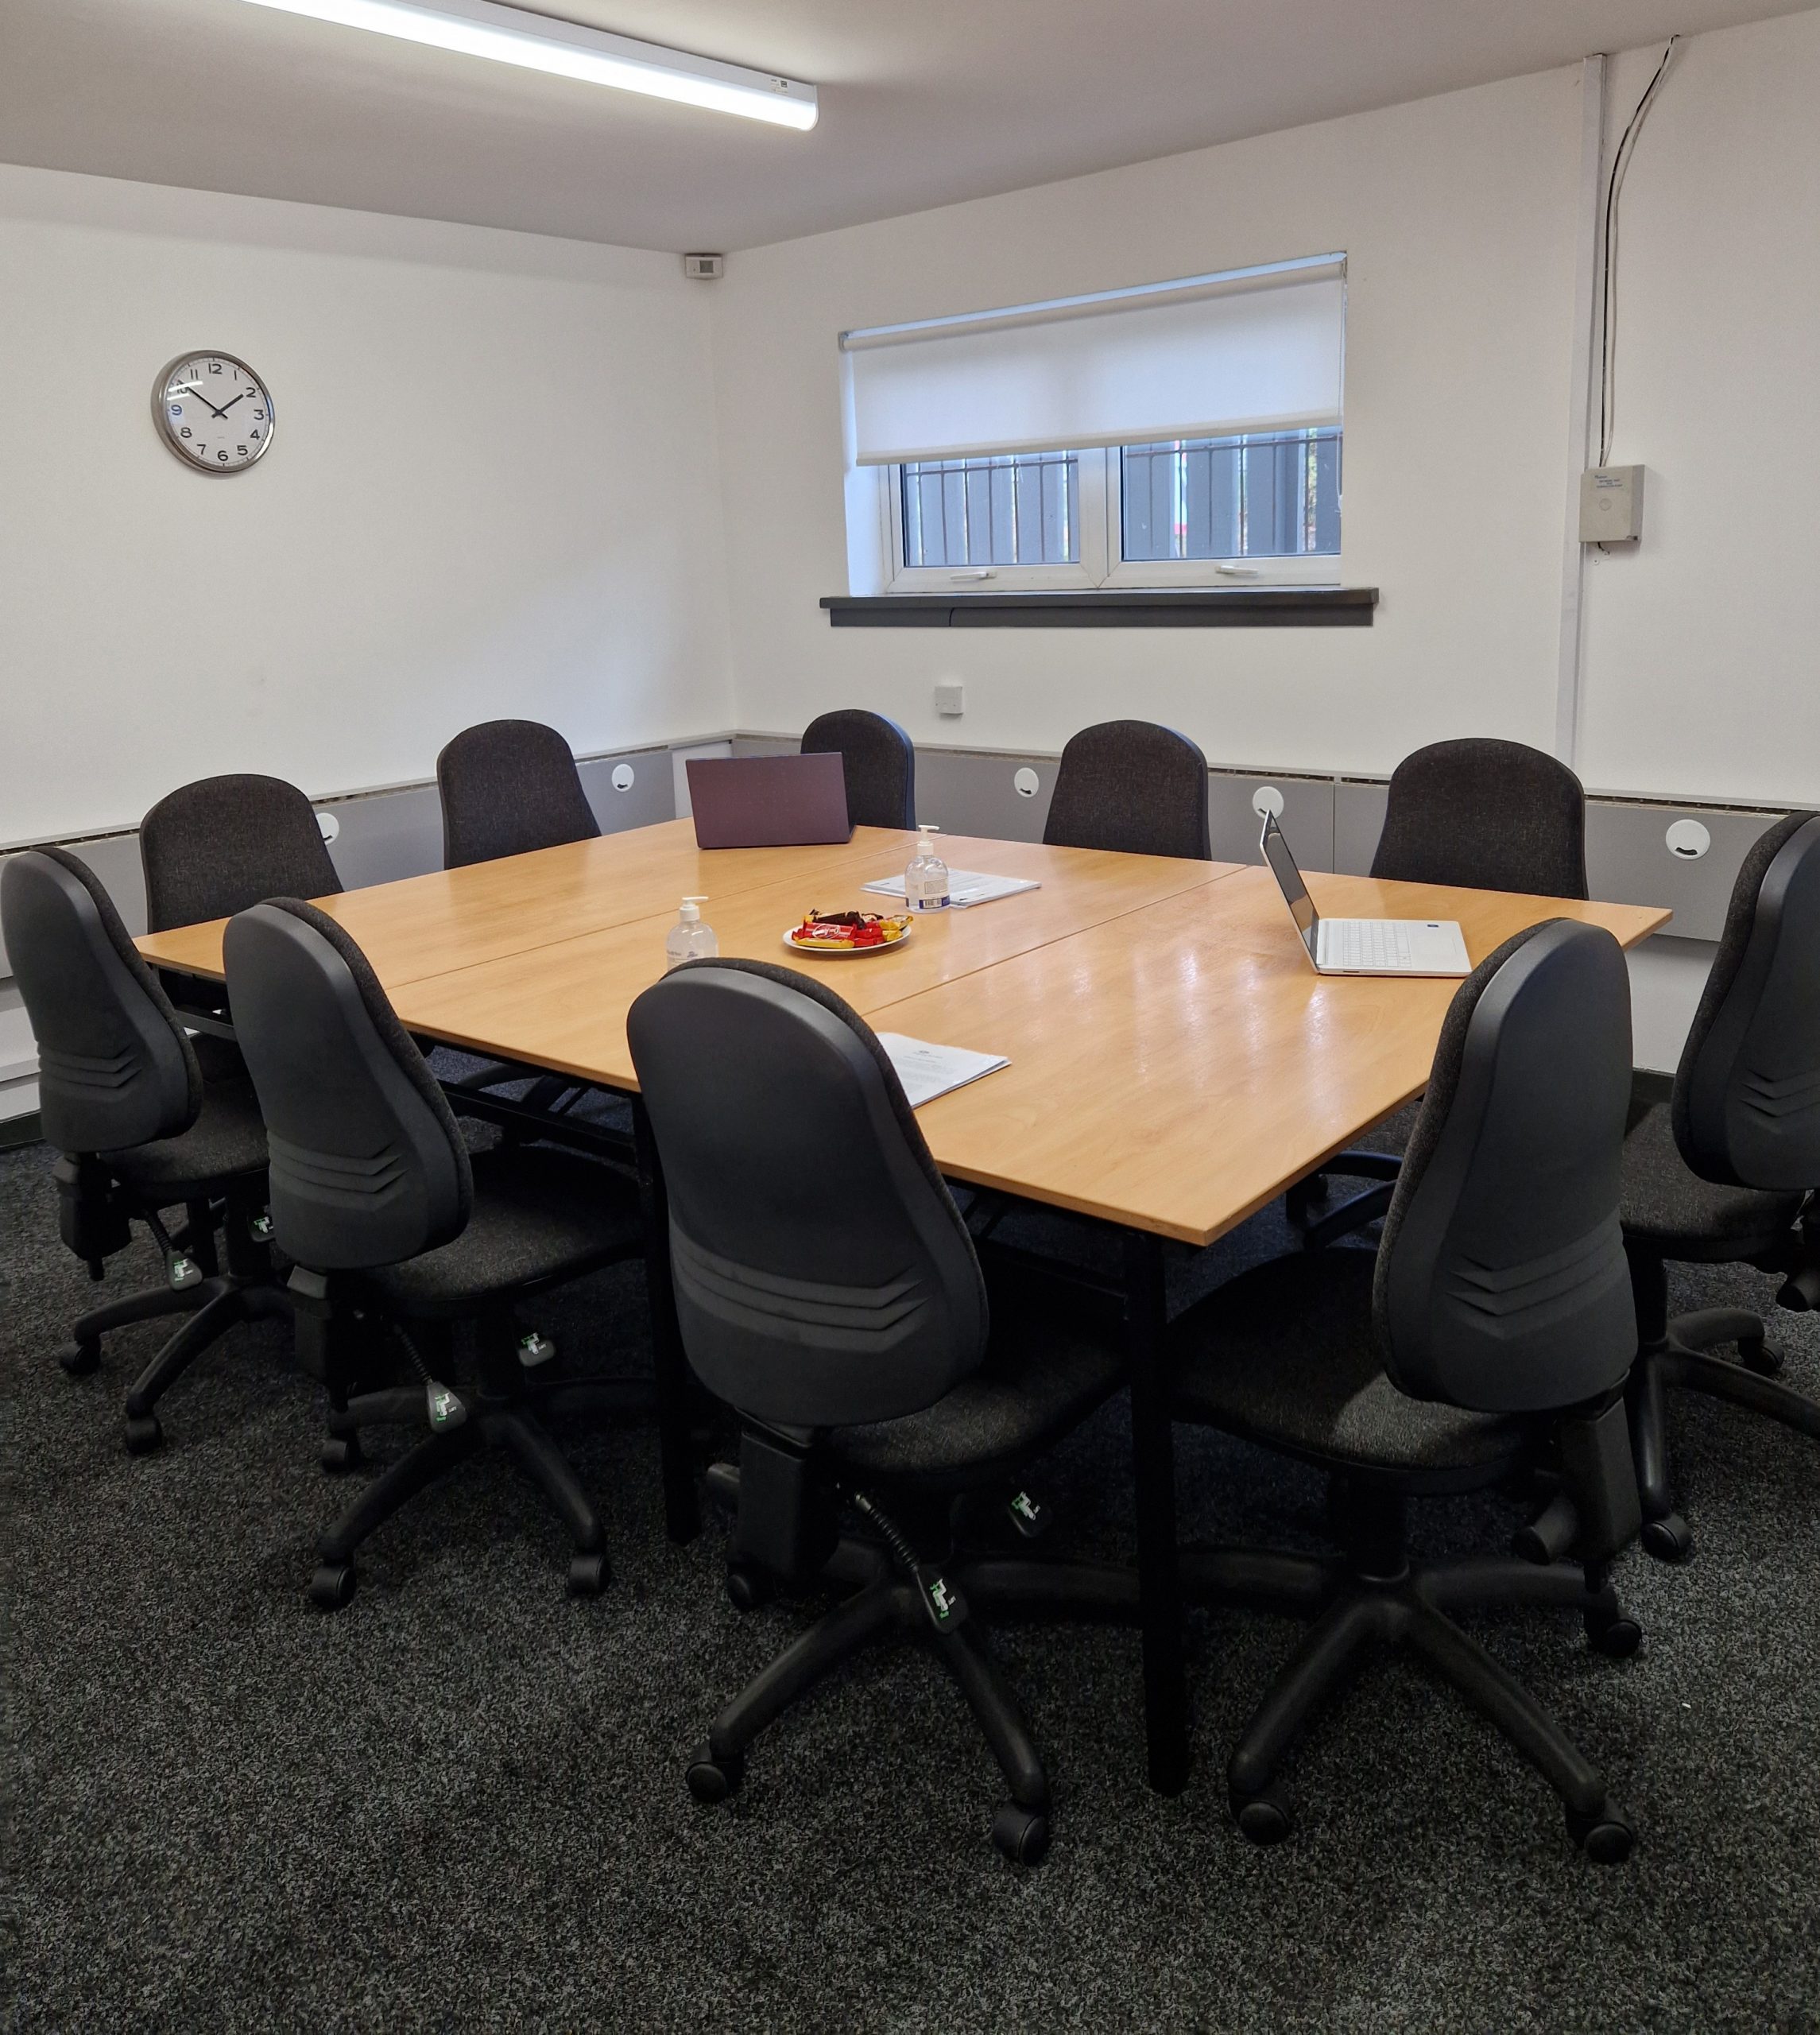 Boardroom style set up image